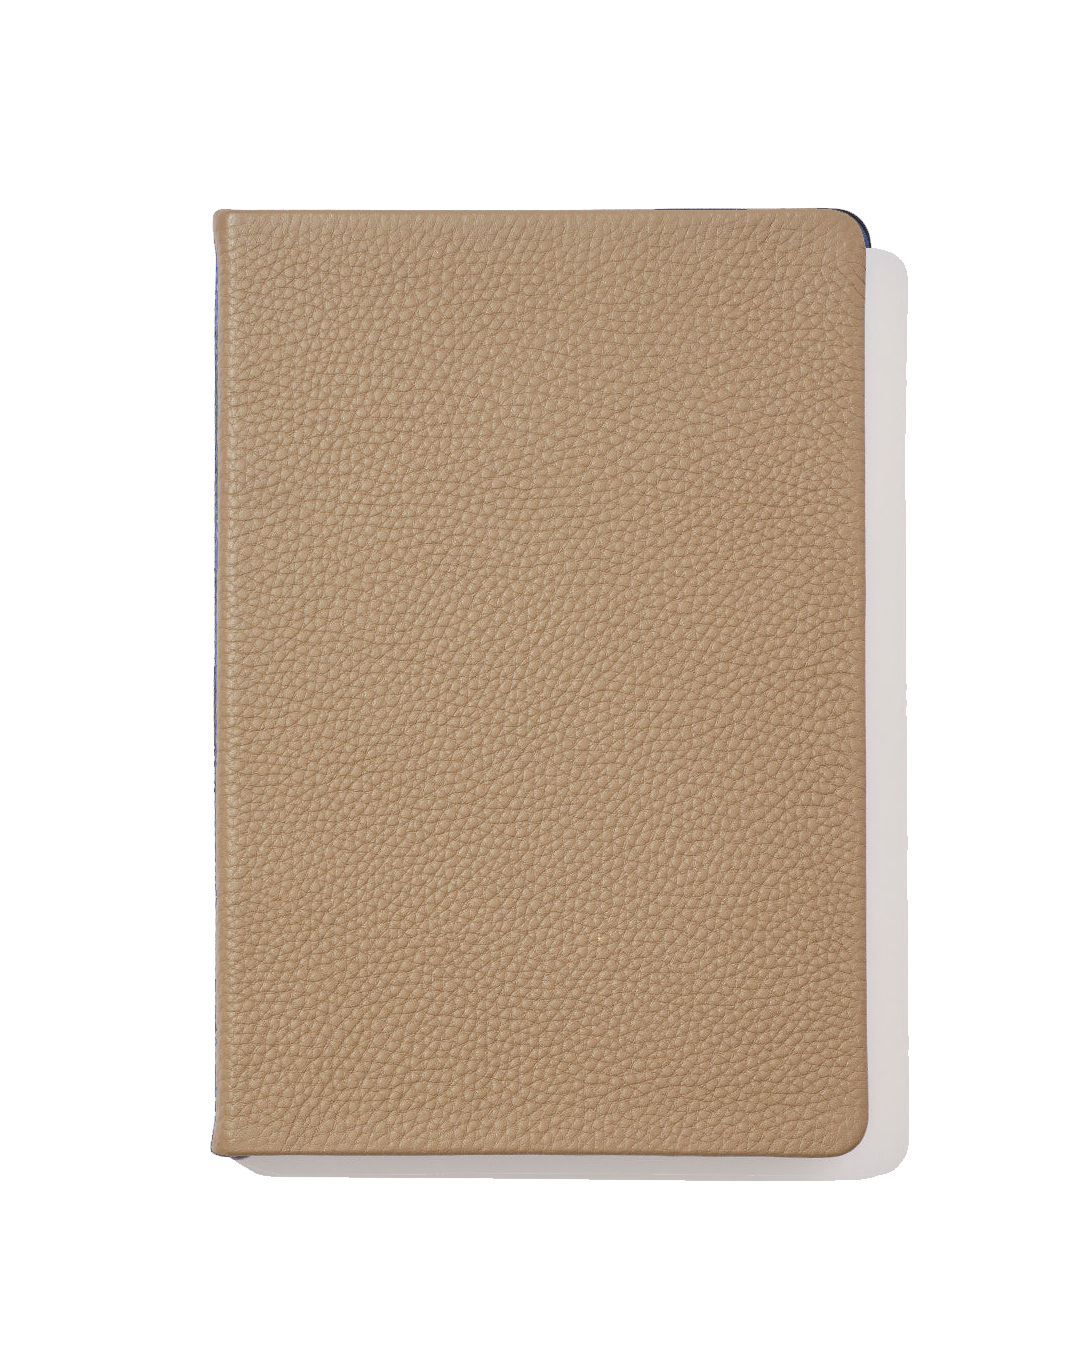 Notebook_leather_a5-04.png